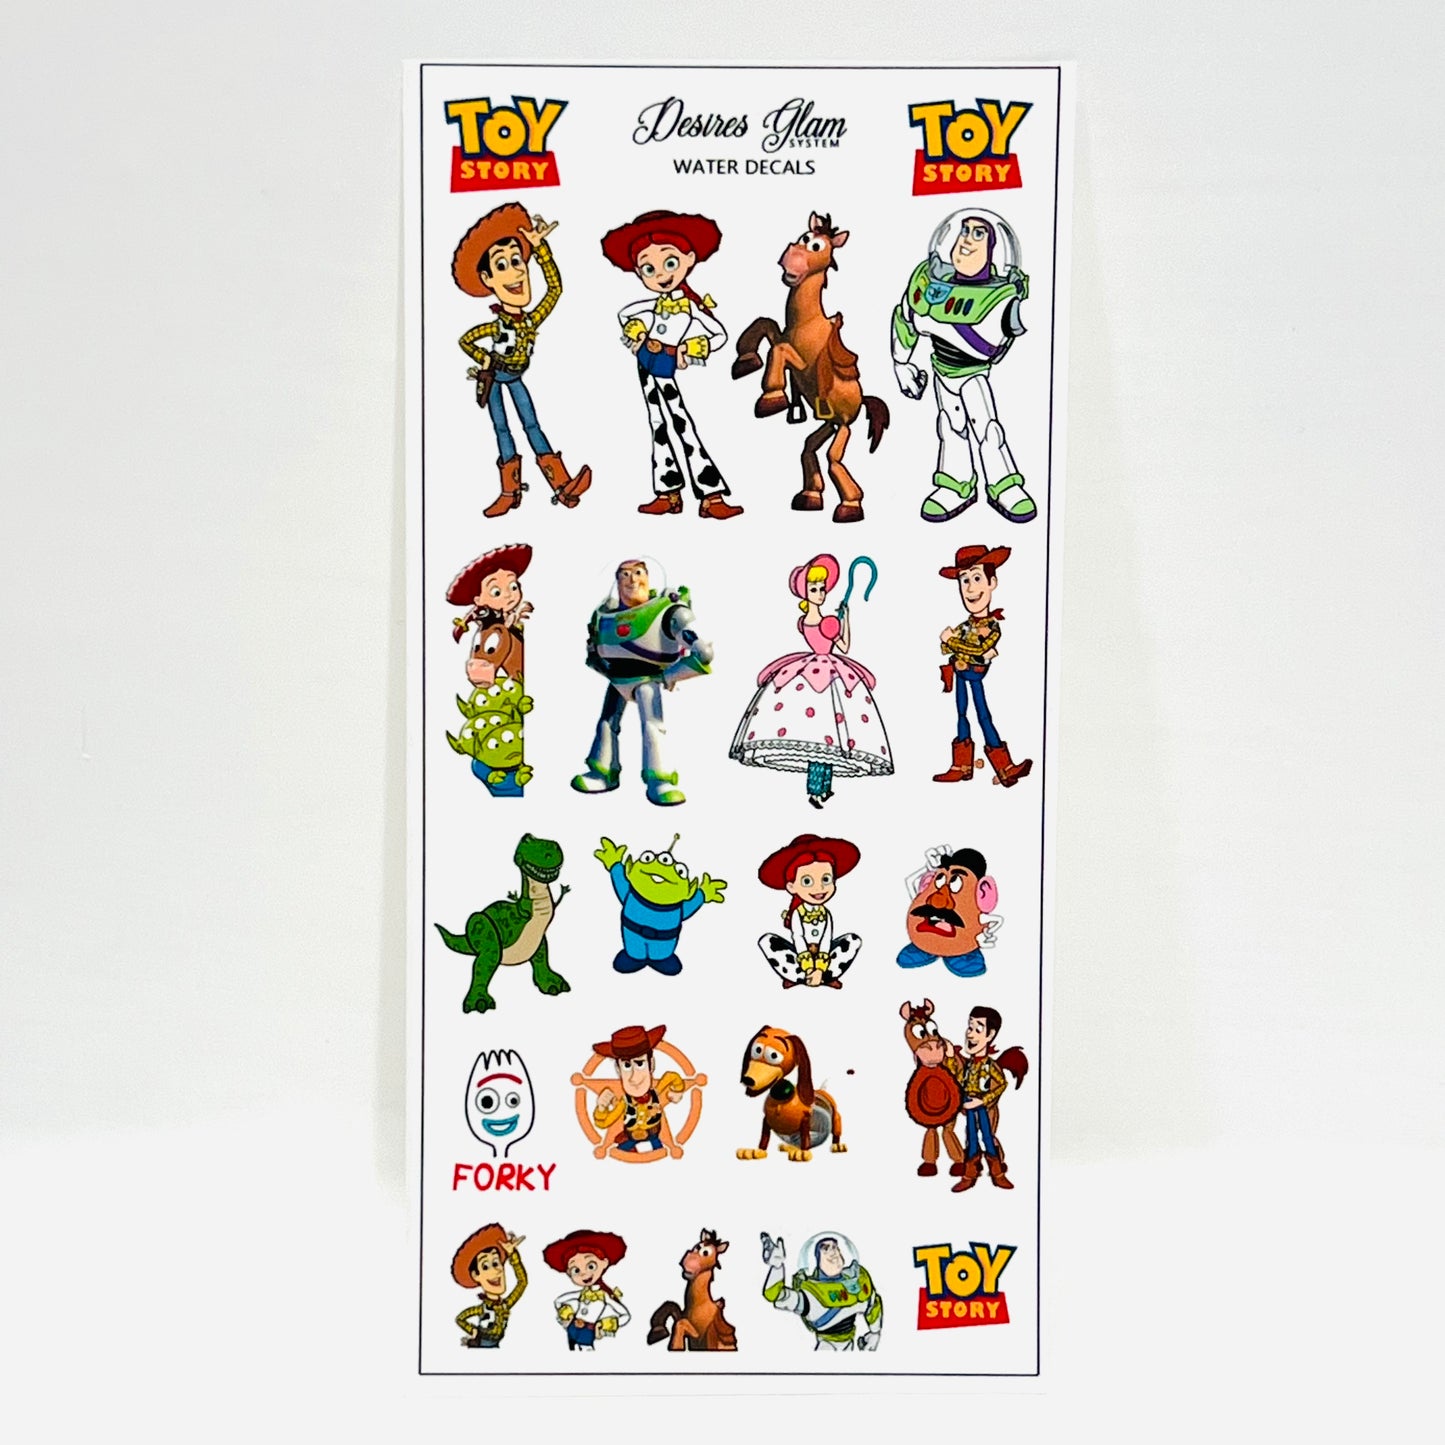 Toy Story Water Decals